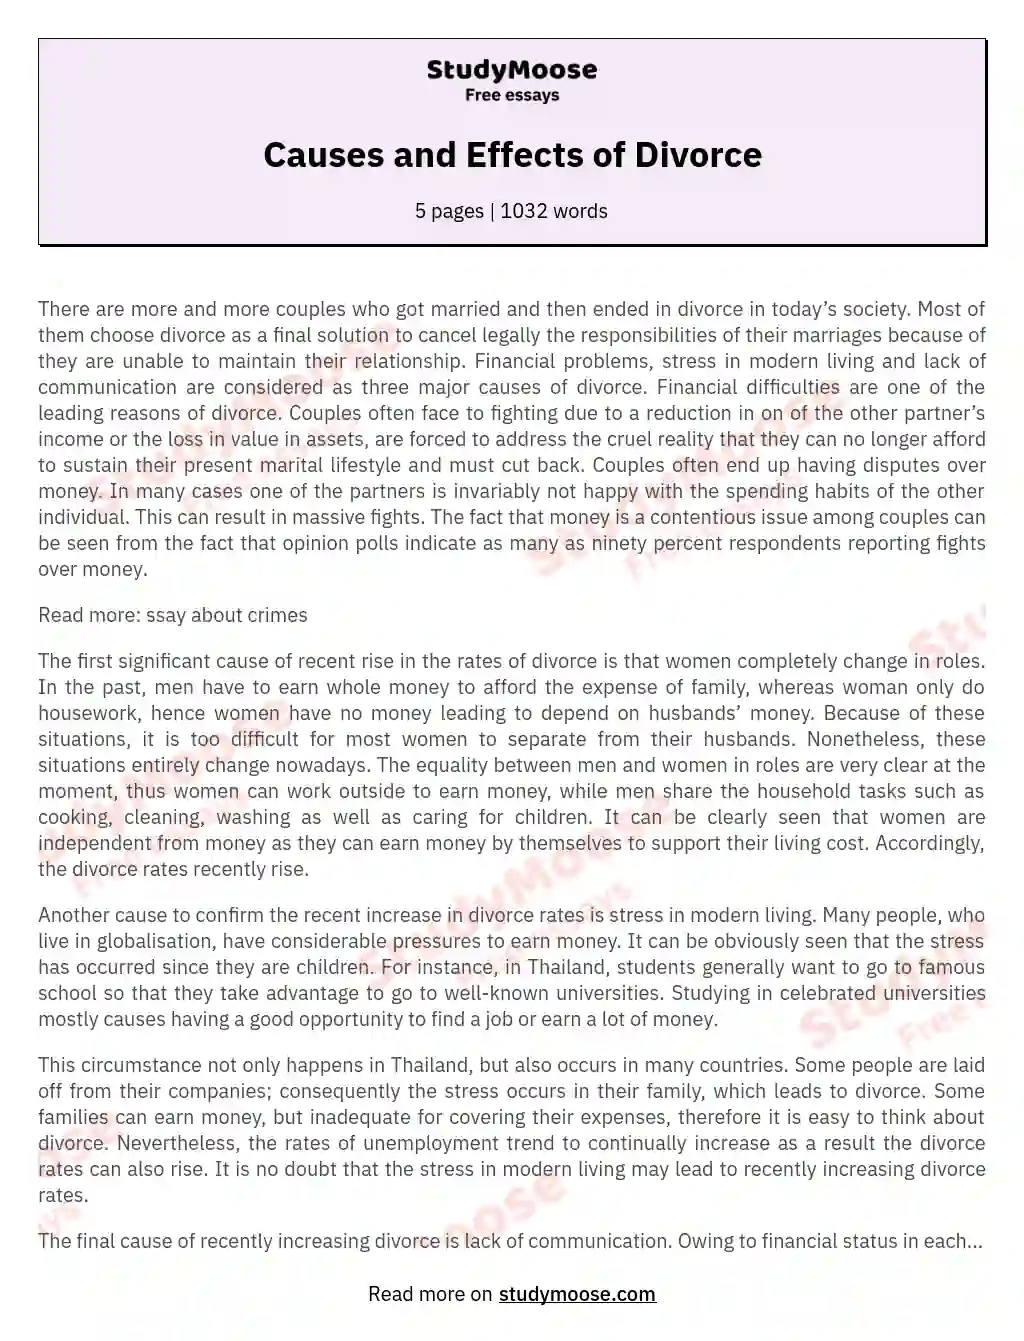 Causes and Effects of Divorce essay